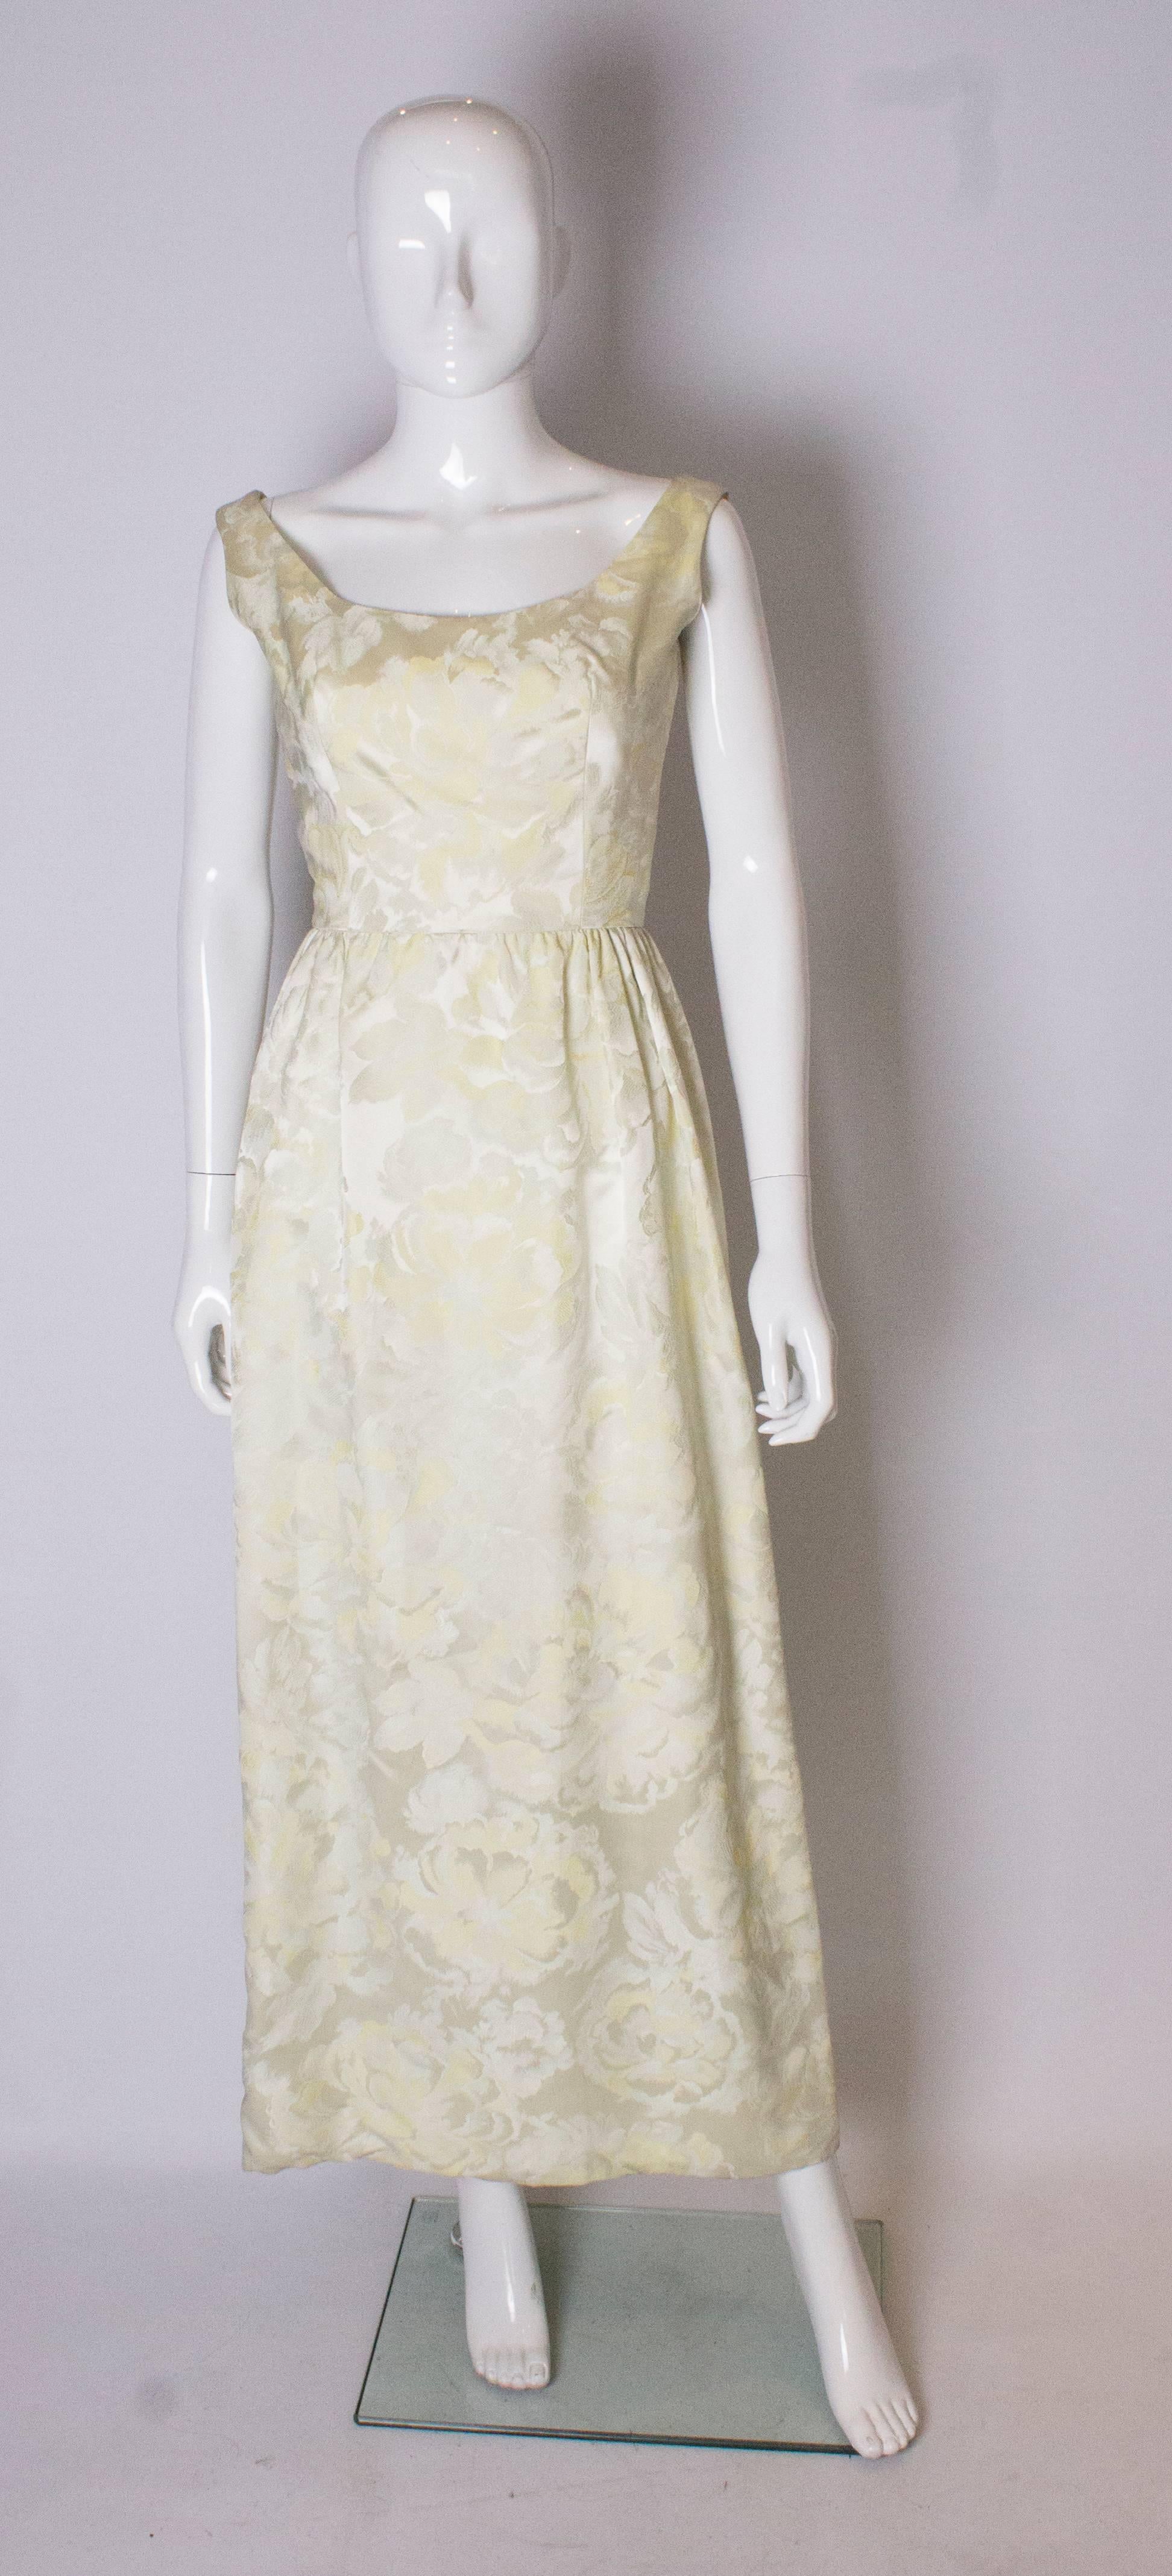 A stunning vintage gown by US designer Sarmi, ideal for Spring/Summer. The gown has a deep neckline at the front  and back, and is in a pale yellow , floral print brocade fabric. The dress is fully lined and has a central back zip.